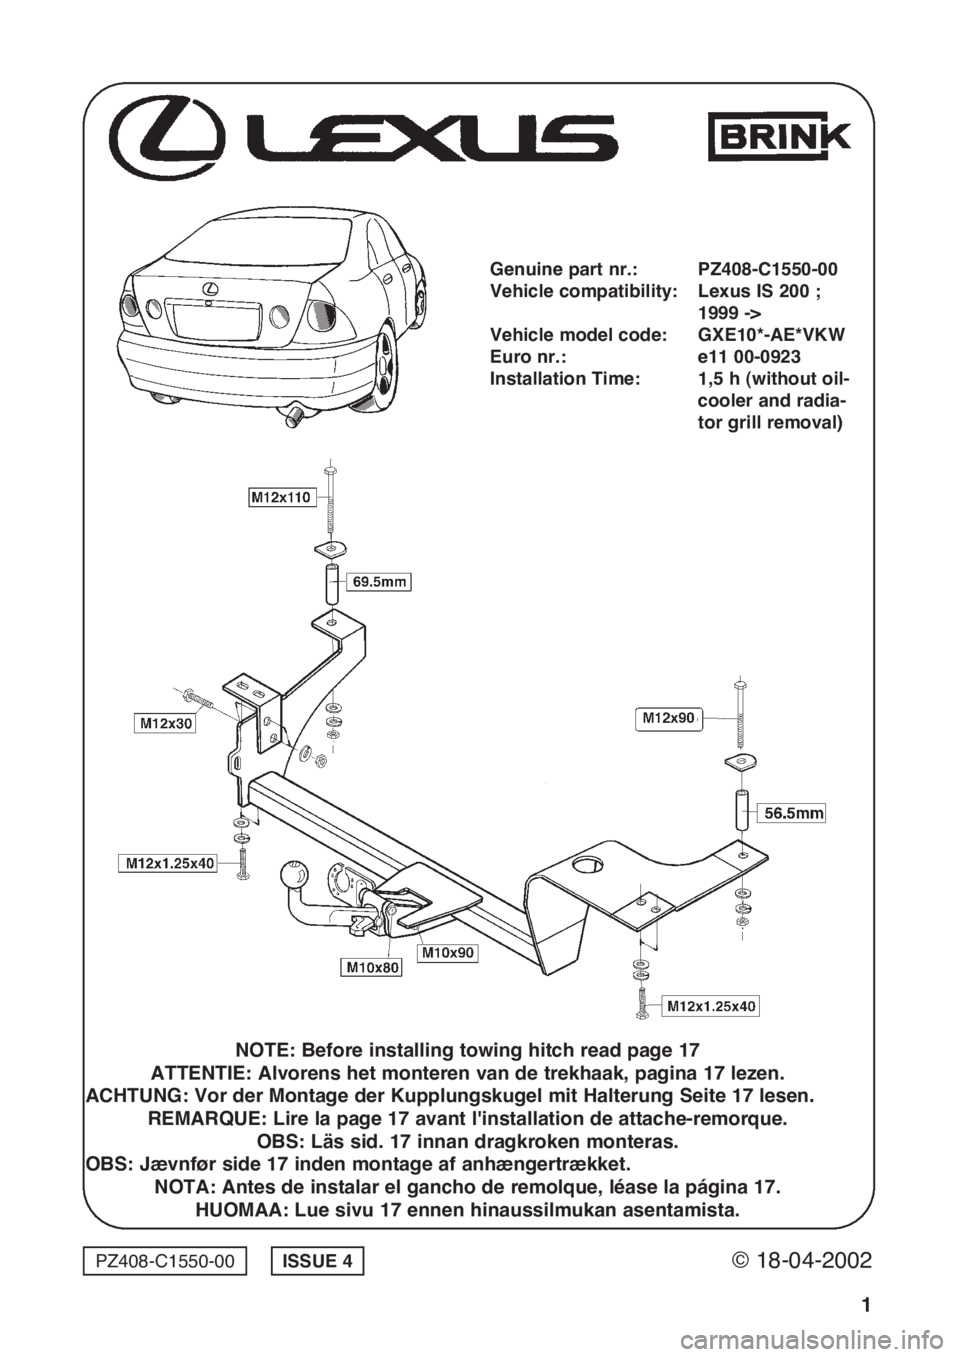 Lexus IS200 1999  Towing hitch © 18-04-2002PZ408-C1550-00
1
ISSUE 4
Genuine part nr.: PZ408-C1550-00
Vehicle compatibility: Lexus IS 200 ; 
1999 ->
Vehicle model code: GXE10*-AE*VKW
Euro nr.: e11 00-0923
Installation Time: 1,5 h (